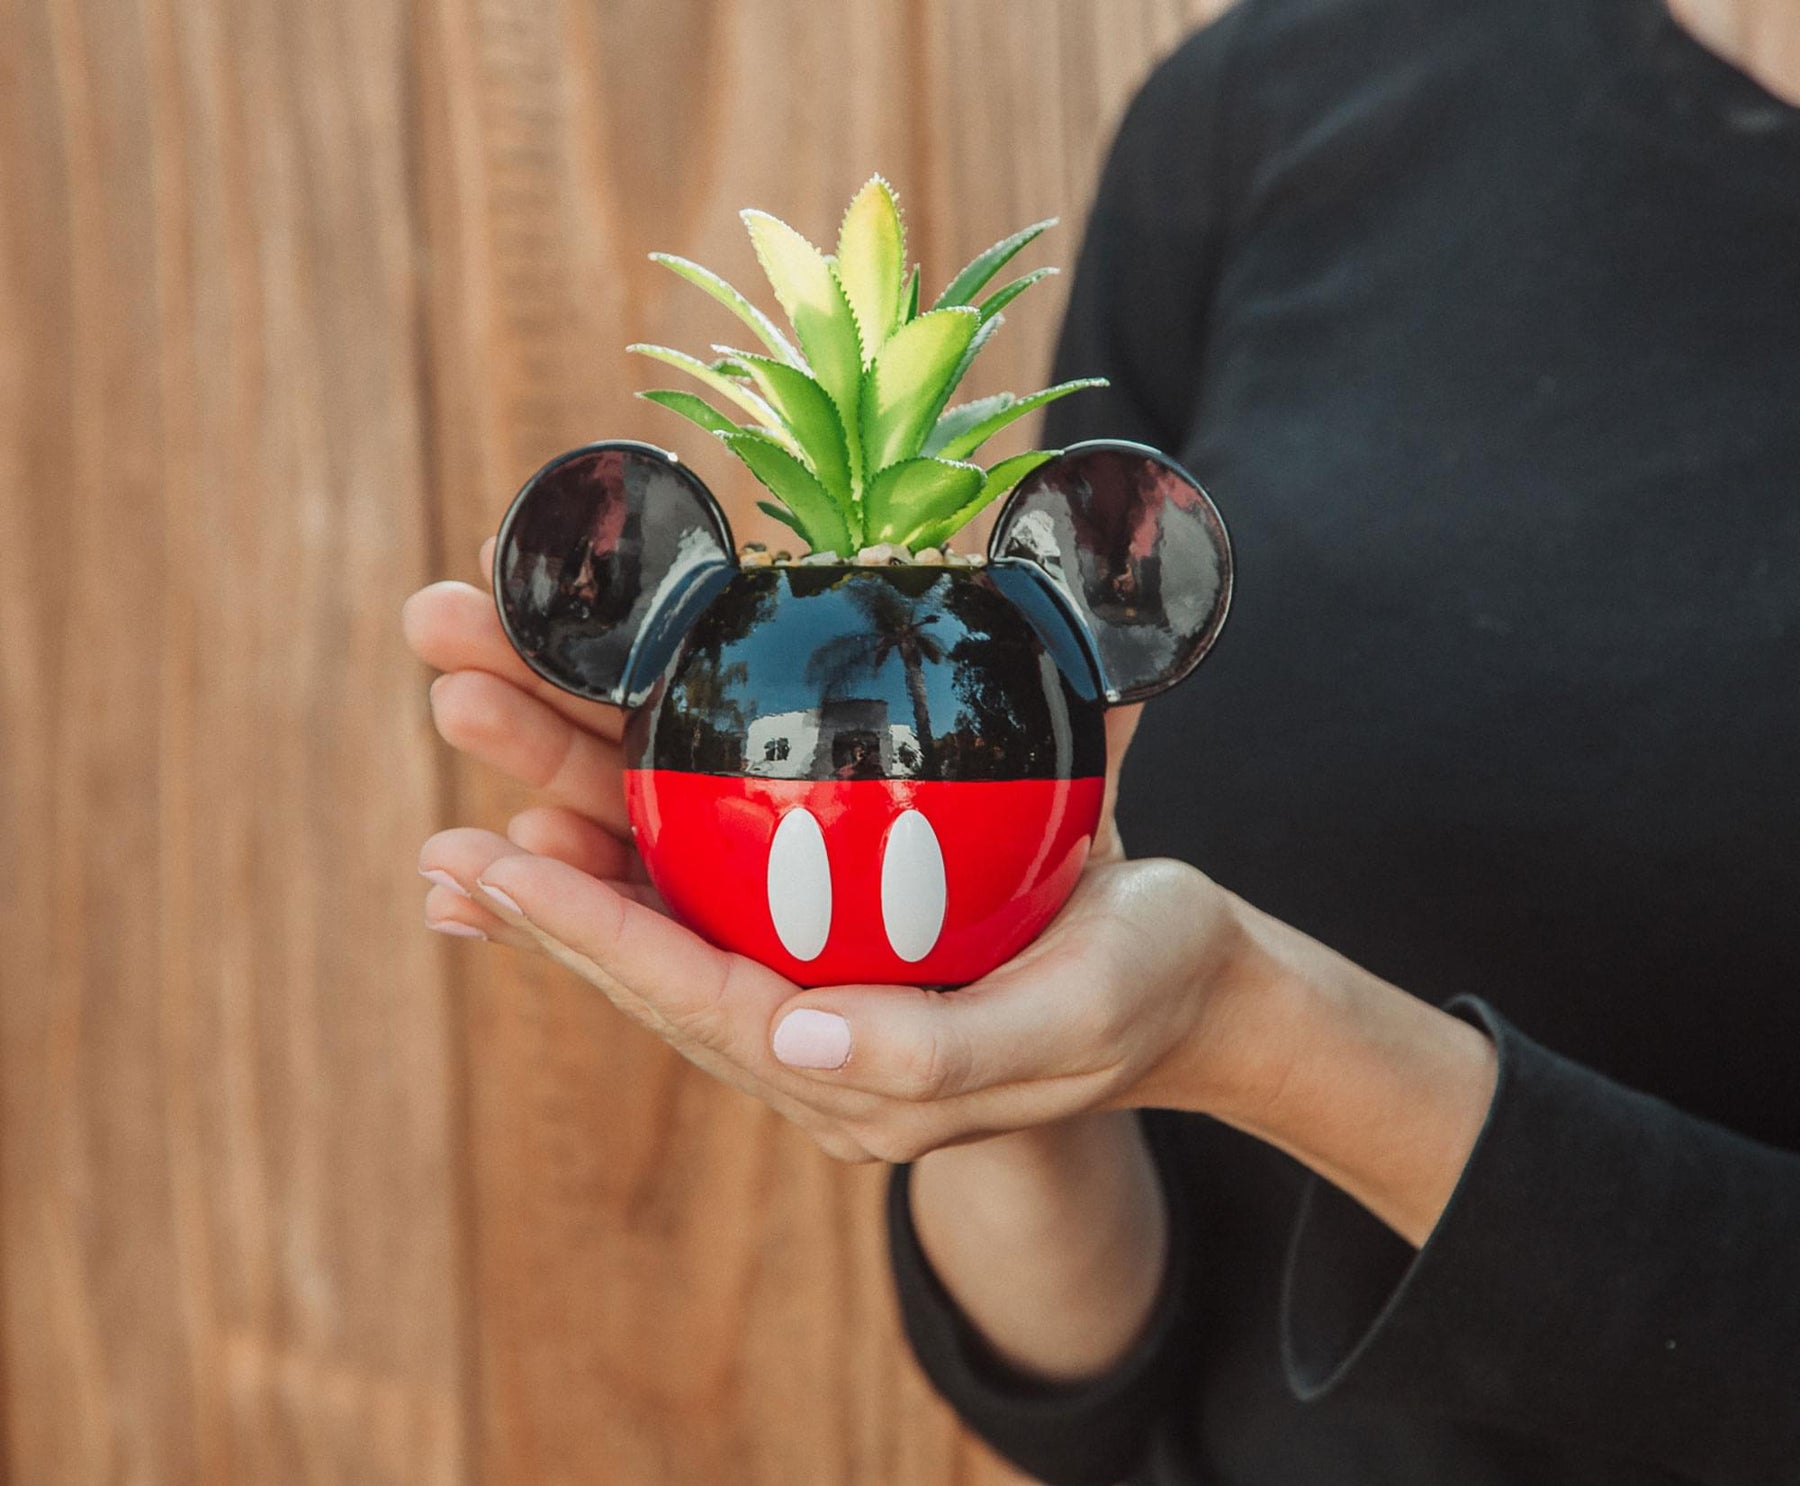 Disney Mickey Mouse 3-Inch Ceramic Mini Planter with Artificial Succulent